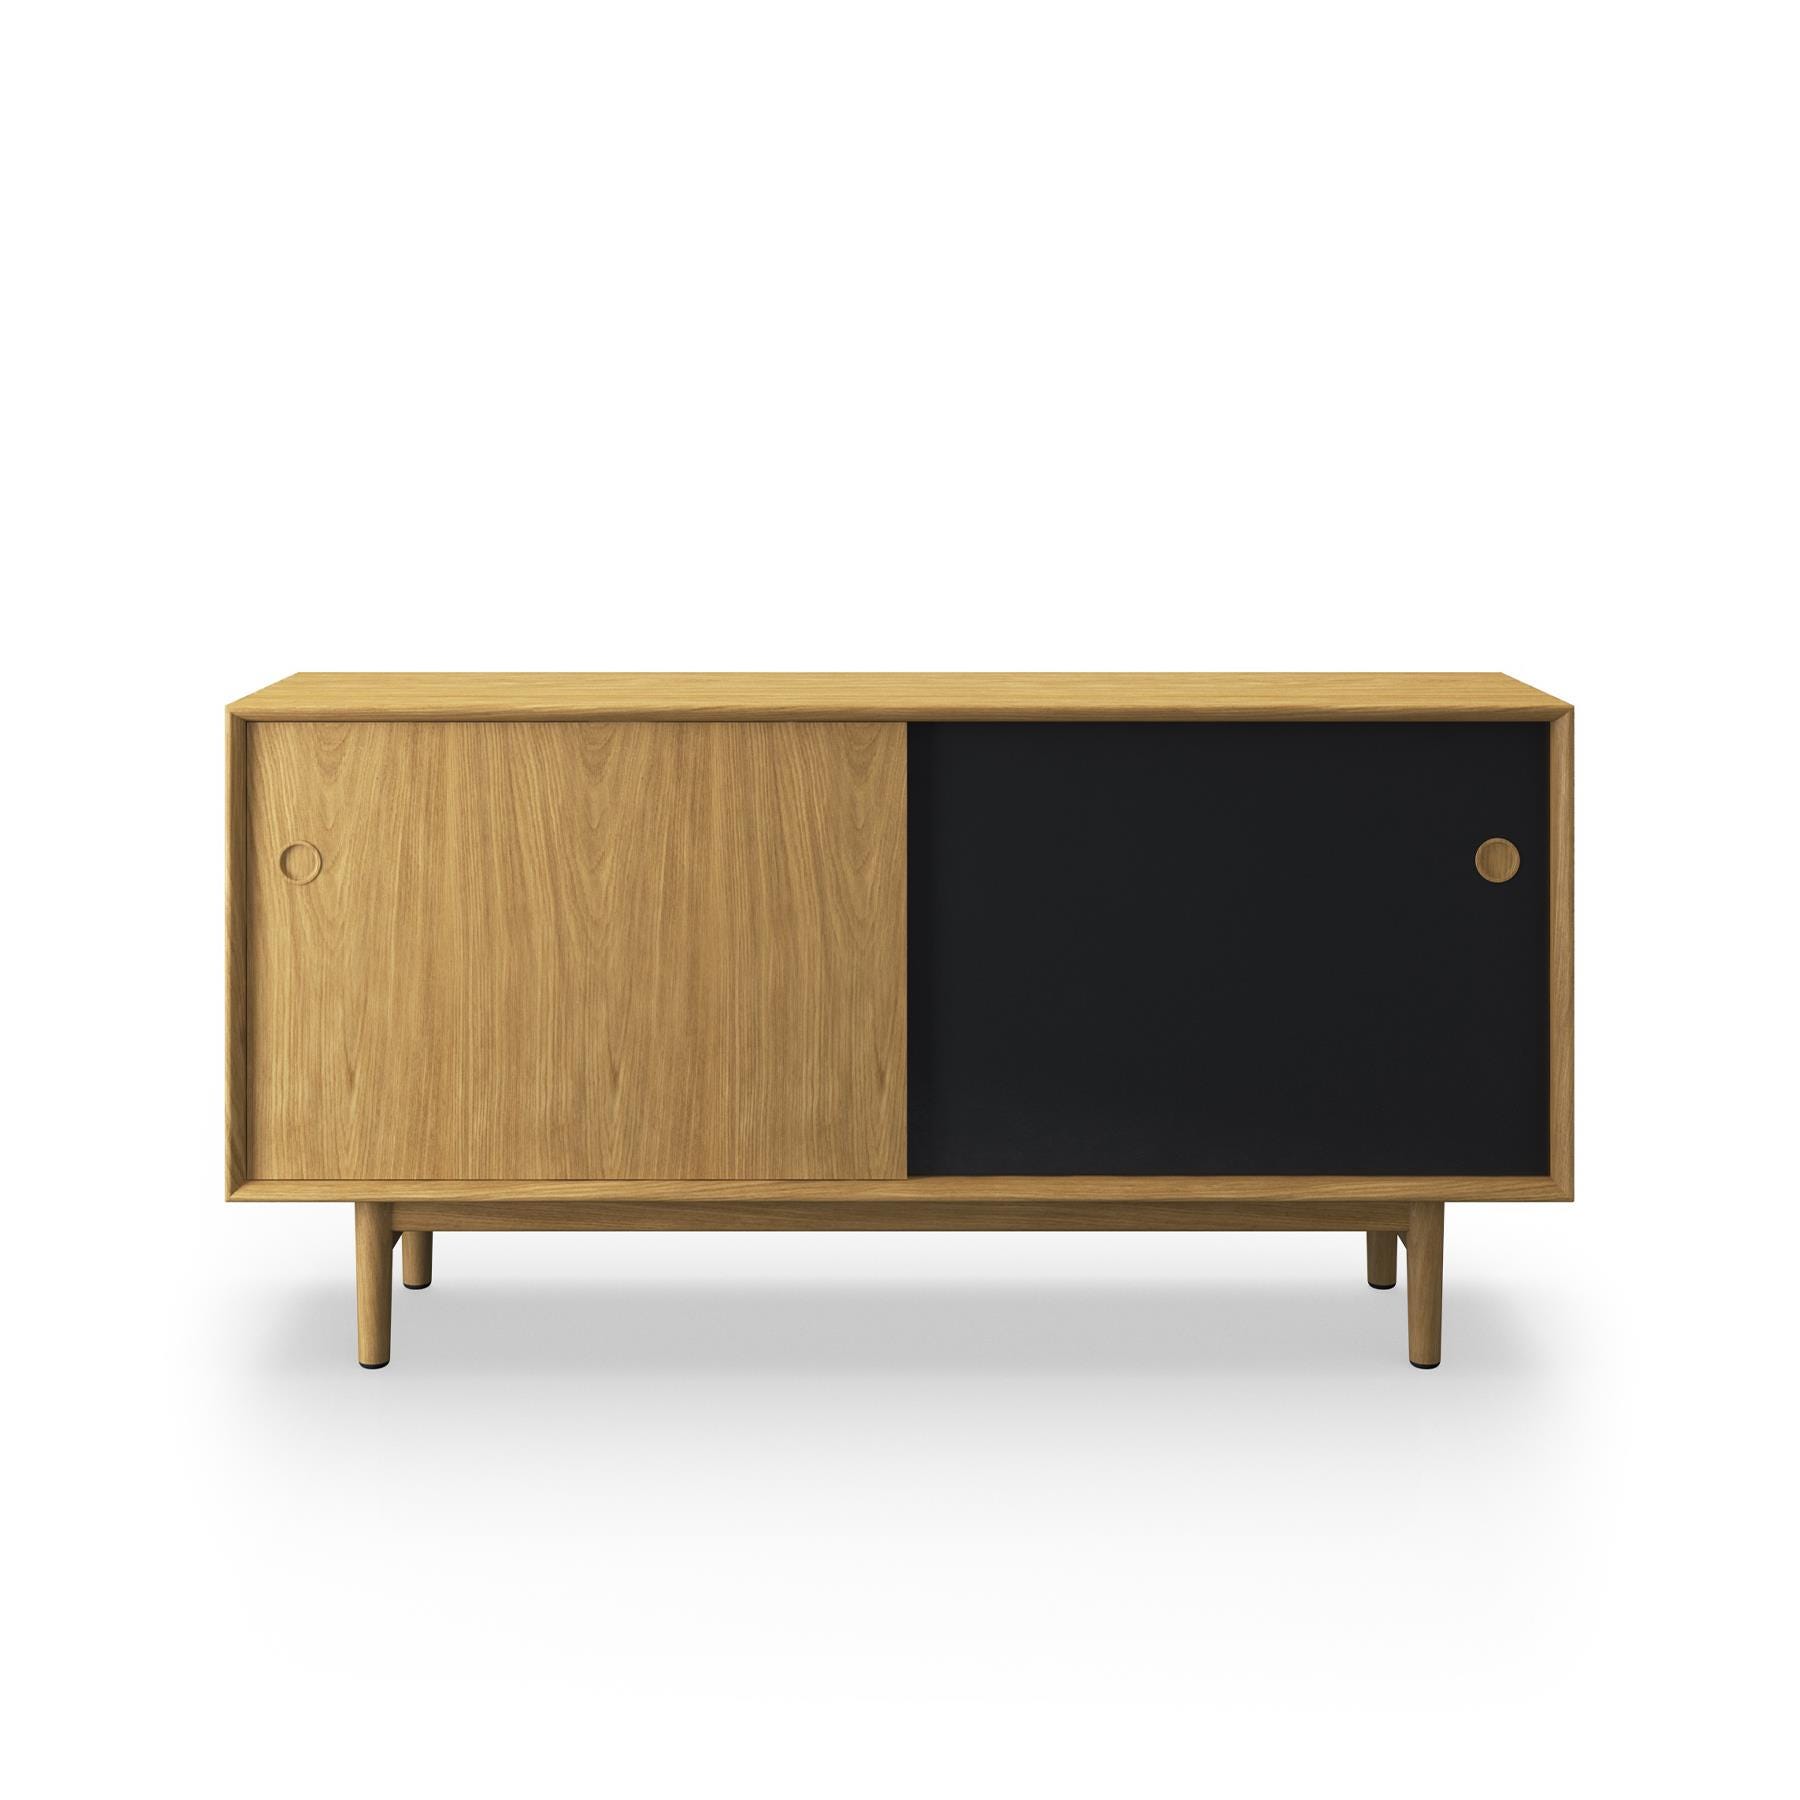 Sibast No 11 Sideboard Natural Oiled Oak Black And Natural Front Wooden Legs Light Wood Designer Furniture From Holloways Of Ludlow